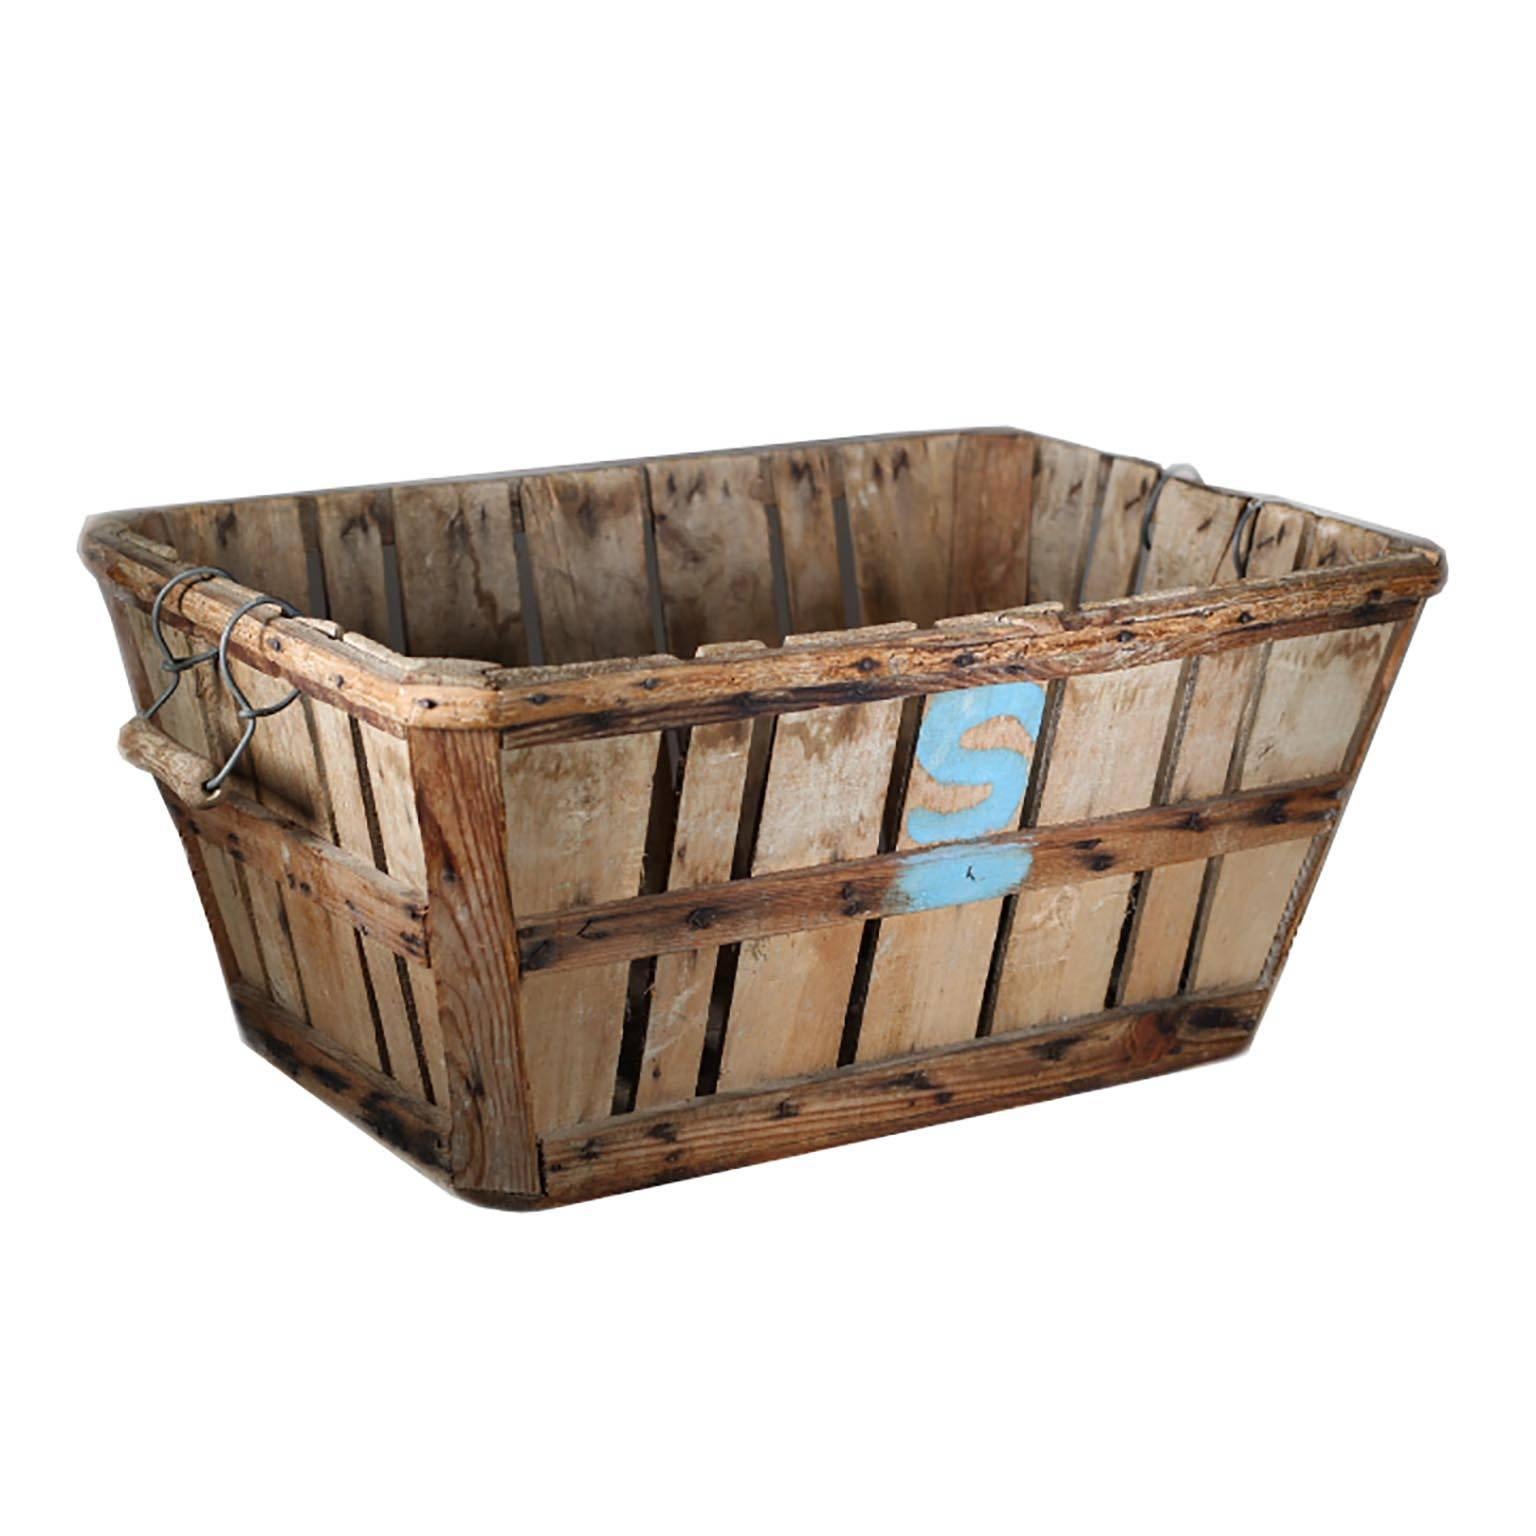 Antique apple orchard basket with metal and wooden handles, circa 1930s-1940s.
